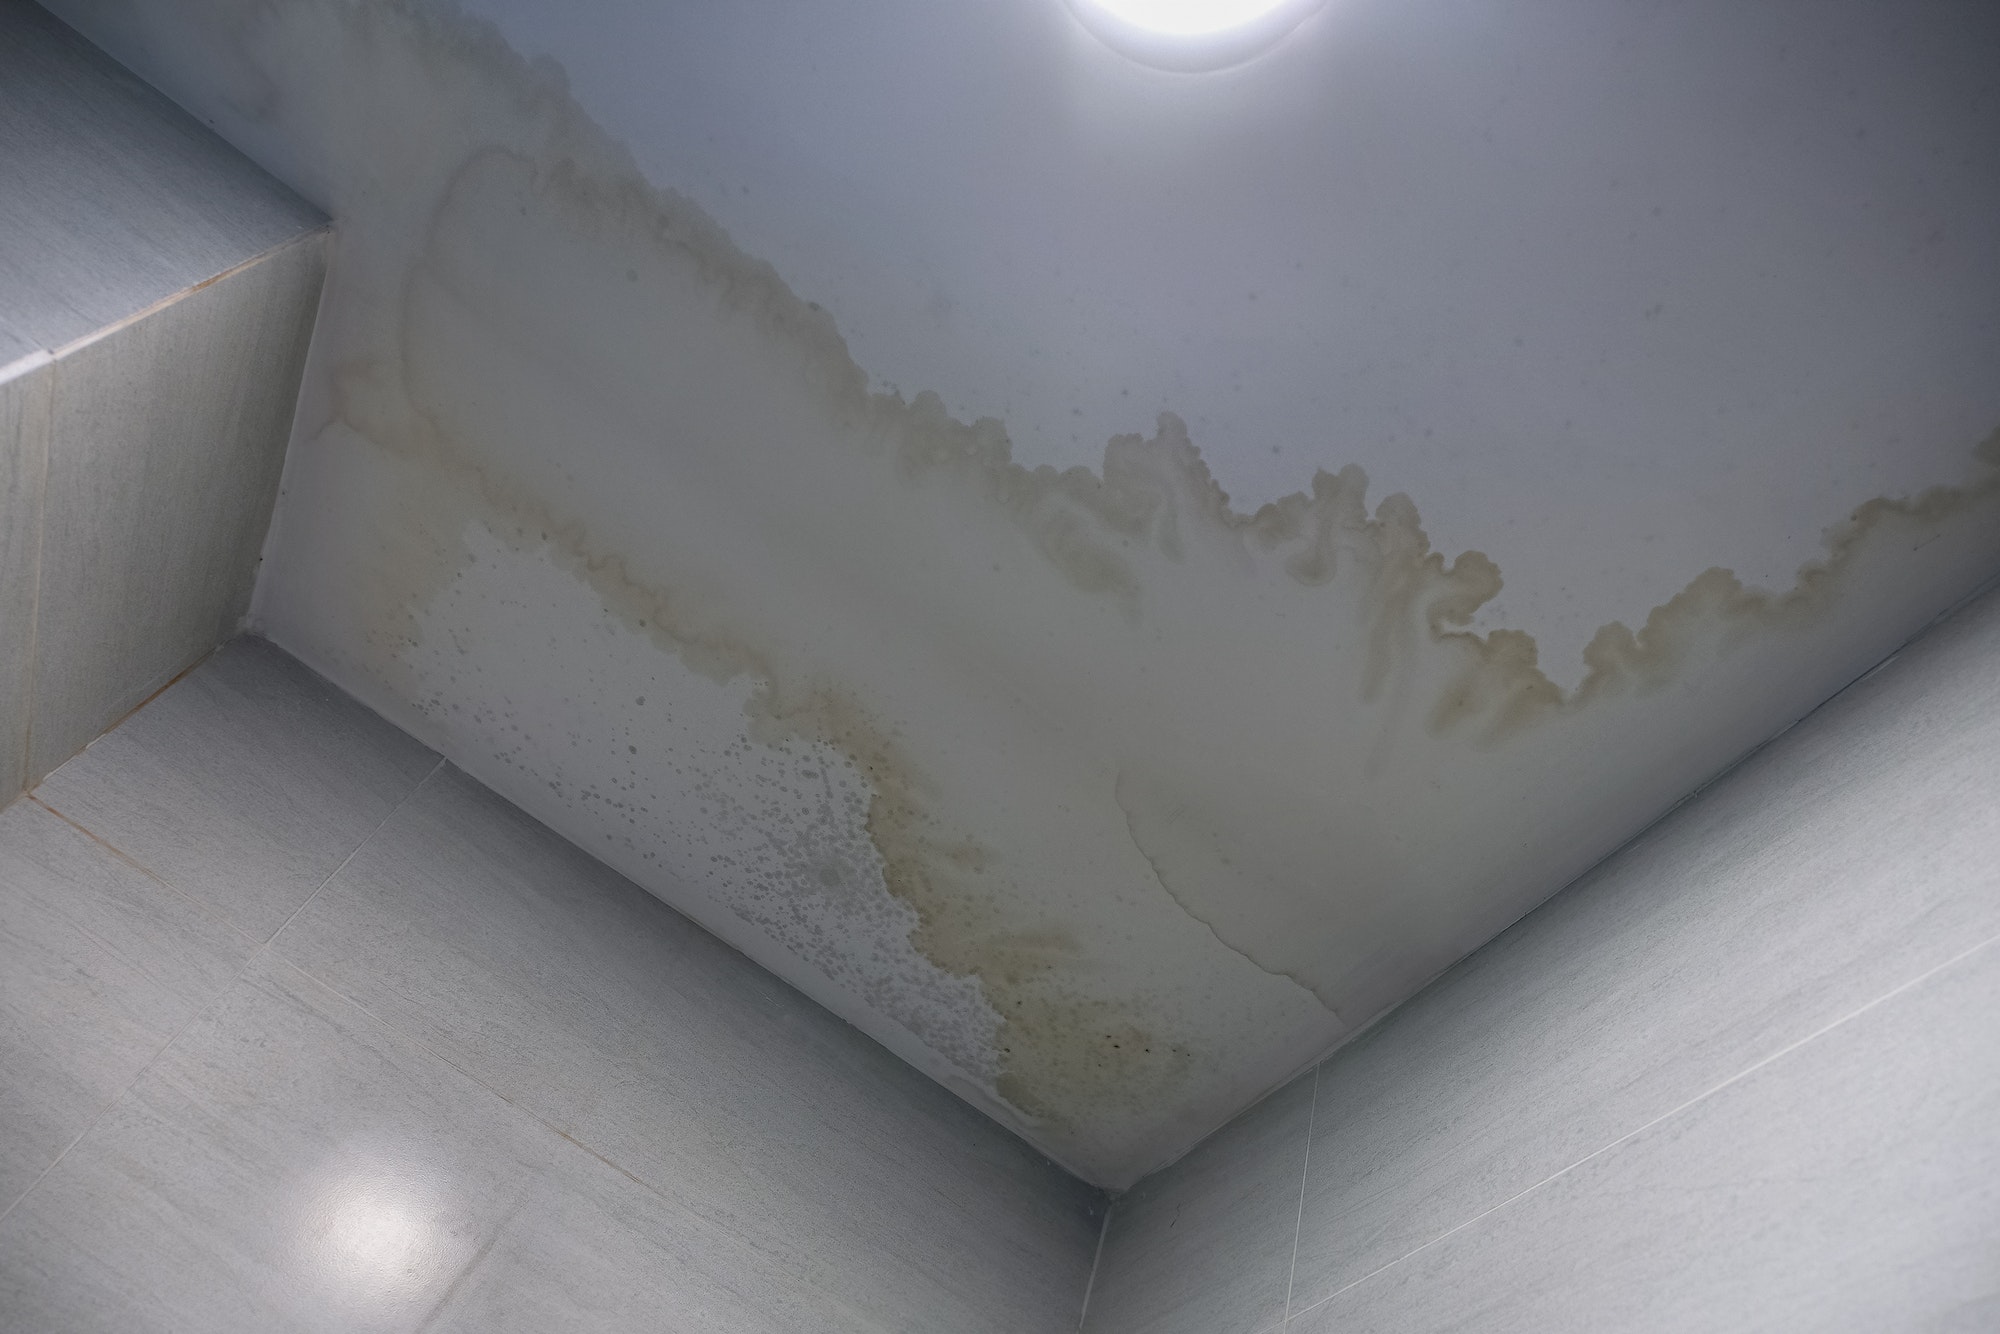 Water stain on the ceiling